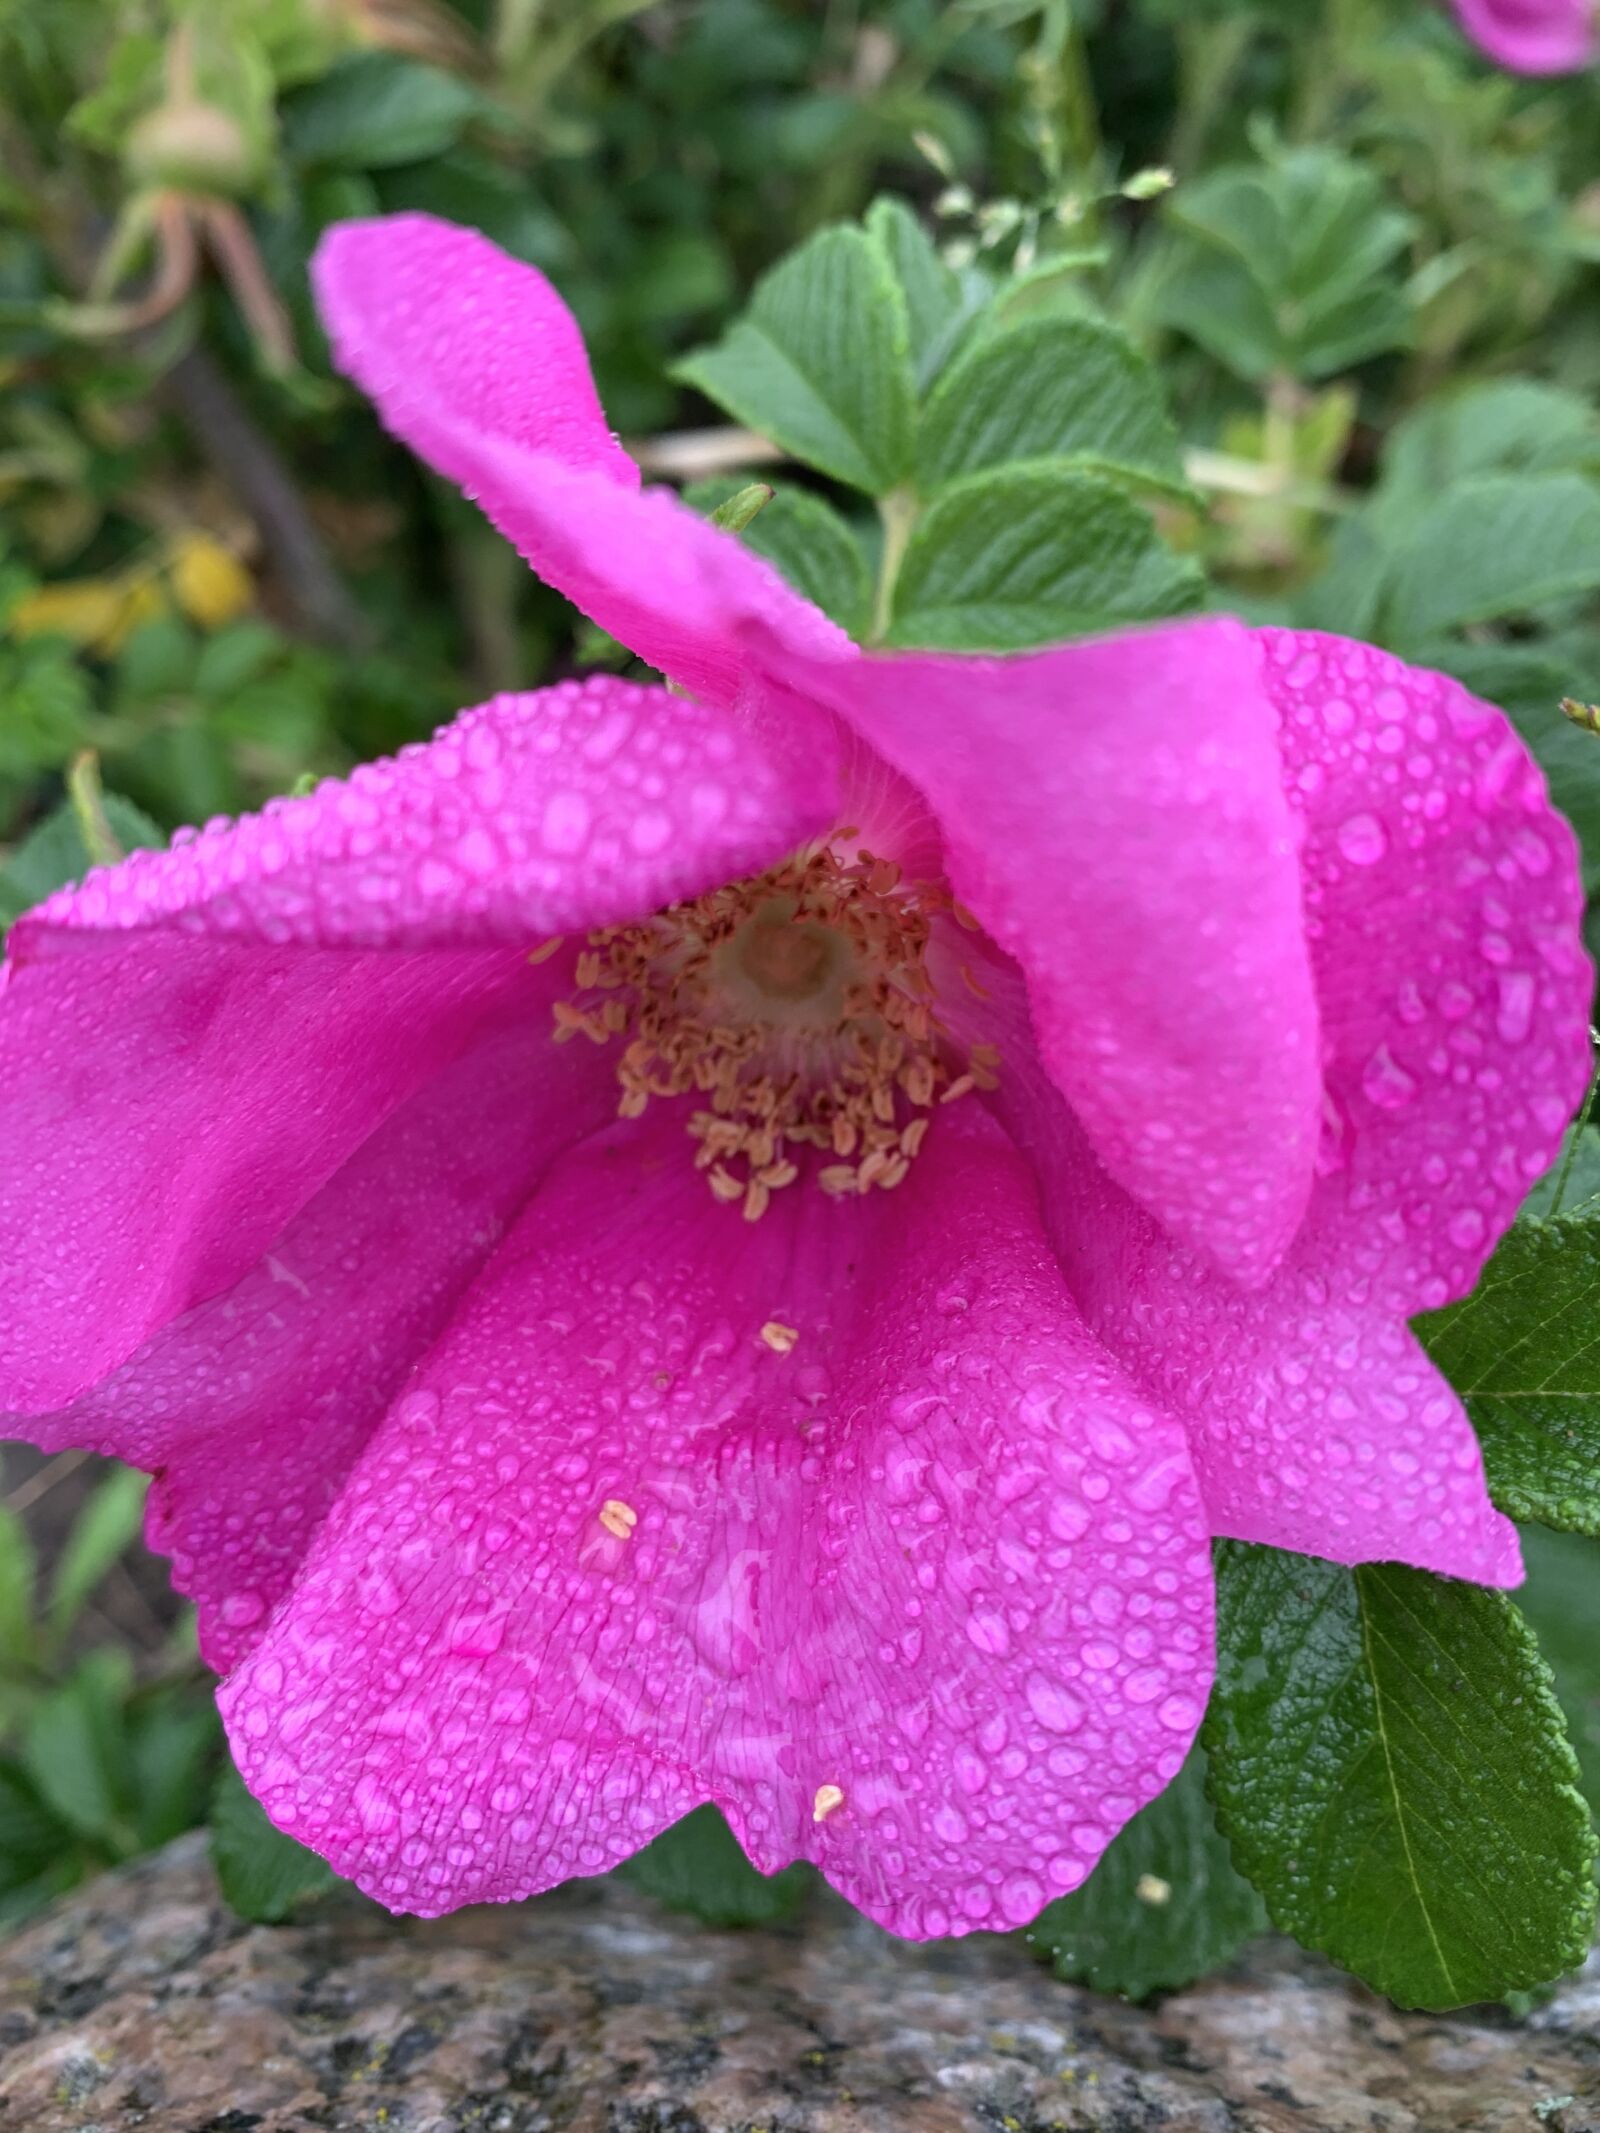 Apple iPhone XS Max sample photo. Flowers, plant, nature photography